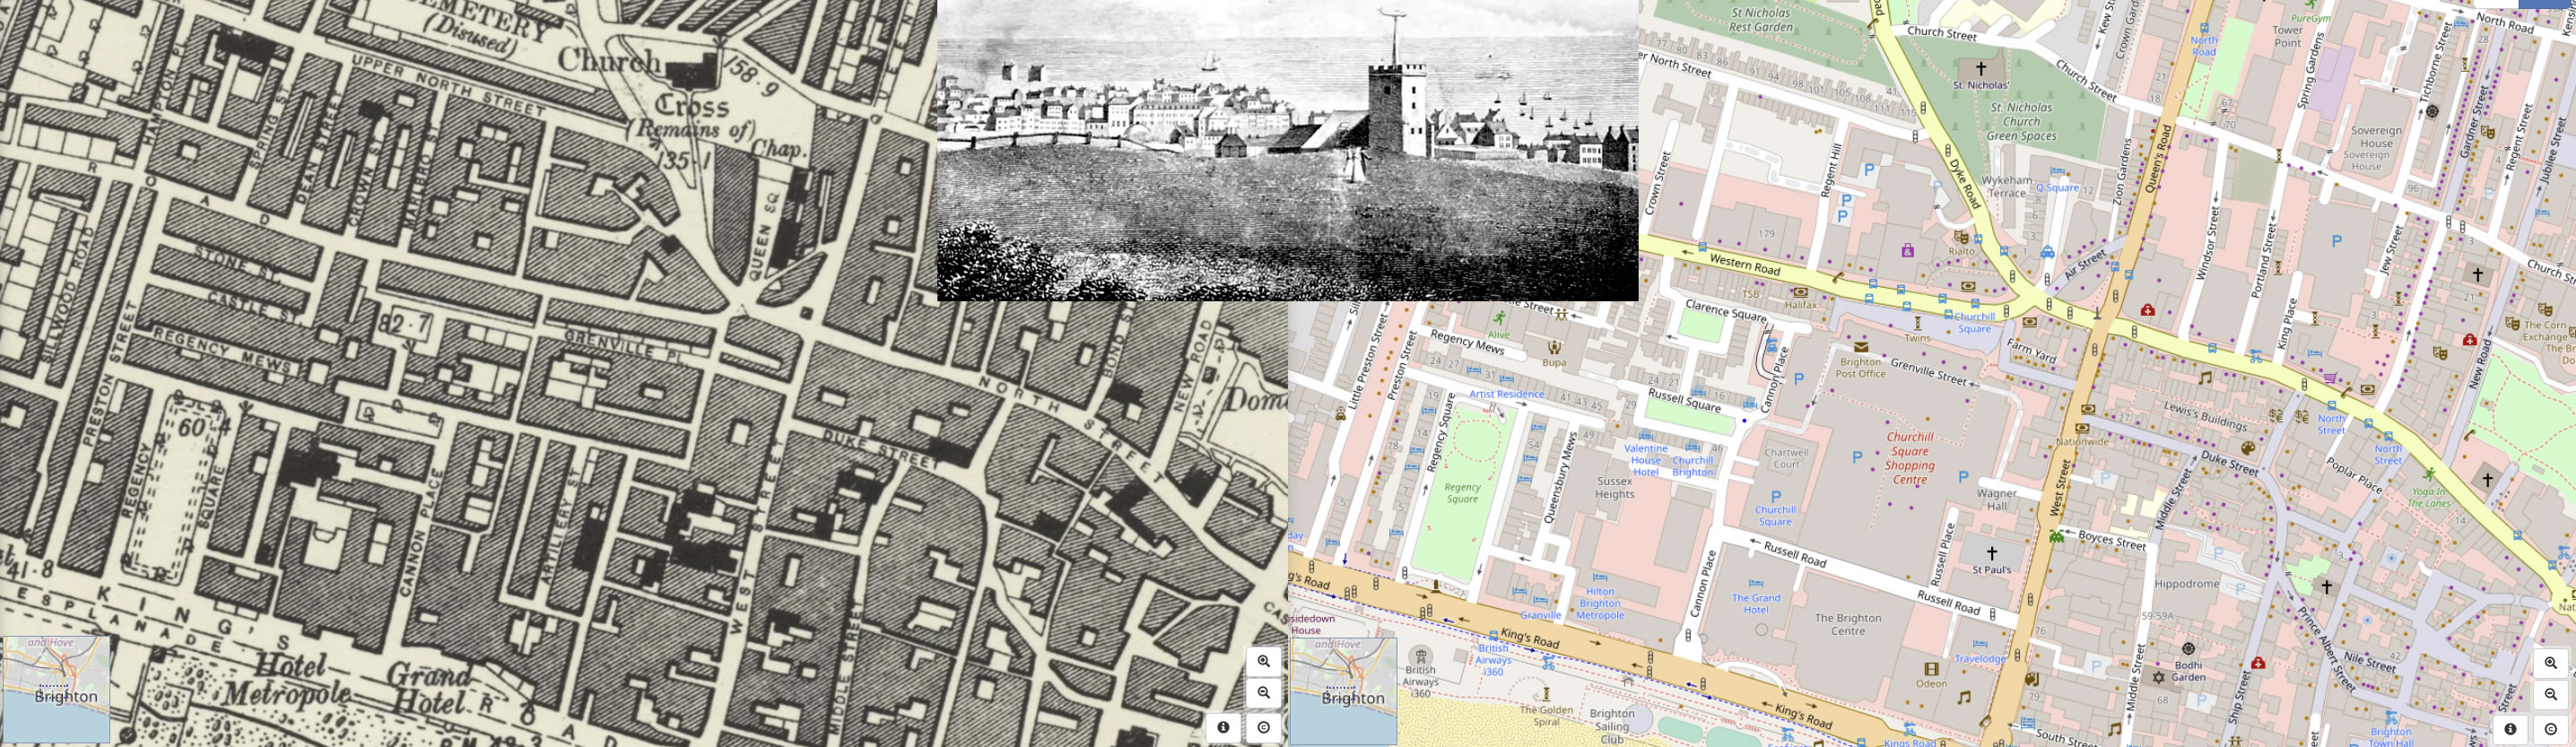 The Genealogist's Map Explorer can overlay a modern map (right) on various older ones, here the 1890s Ordnance
		Survey map. Both show the area around Russell Street where Richard's forebears lived – now covered by the
		Churchill Square shopping centre. Both show St Nicholas's church (pictured in 1806, inset), where many of his
		family were christened and married.